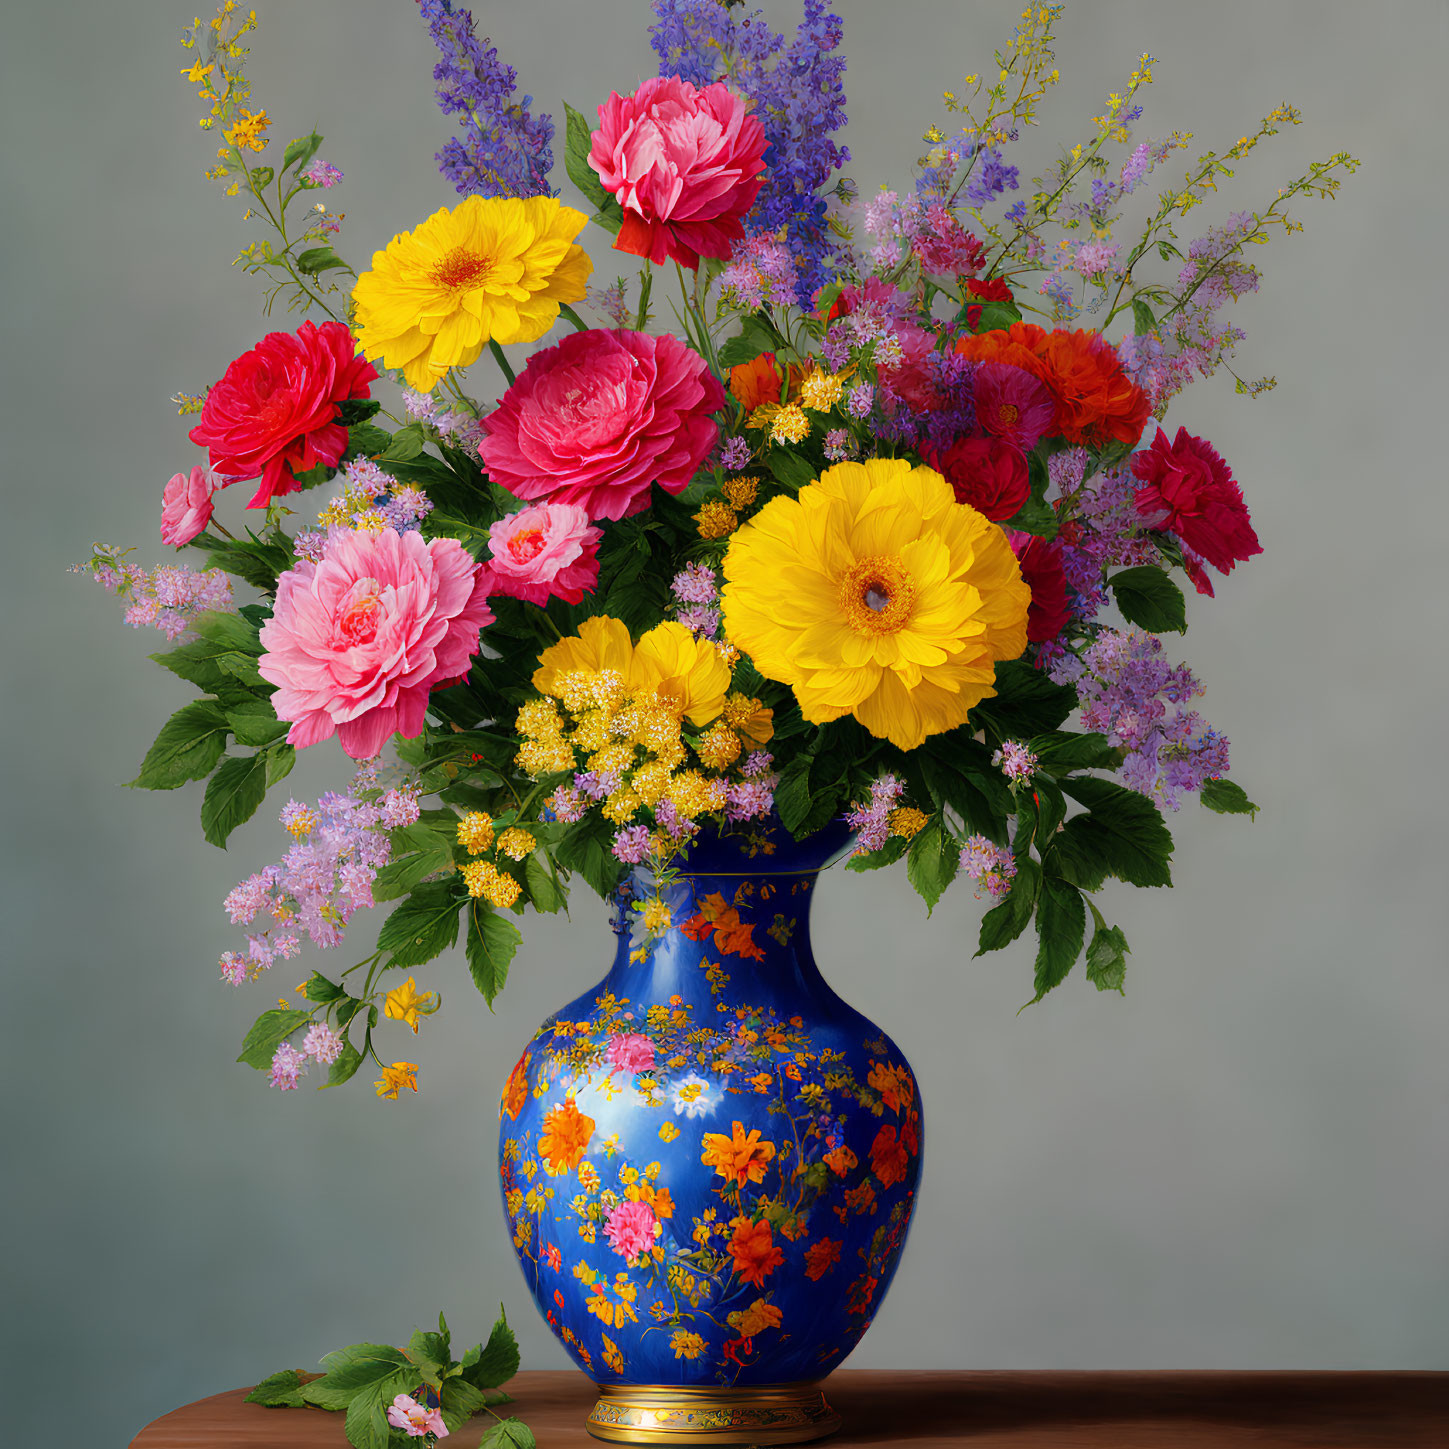 Colorful Flower Bouquet in Blue Vase on Neutral Background